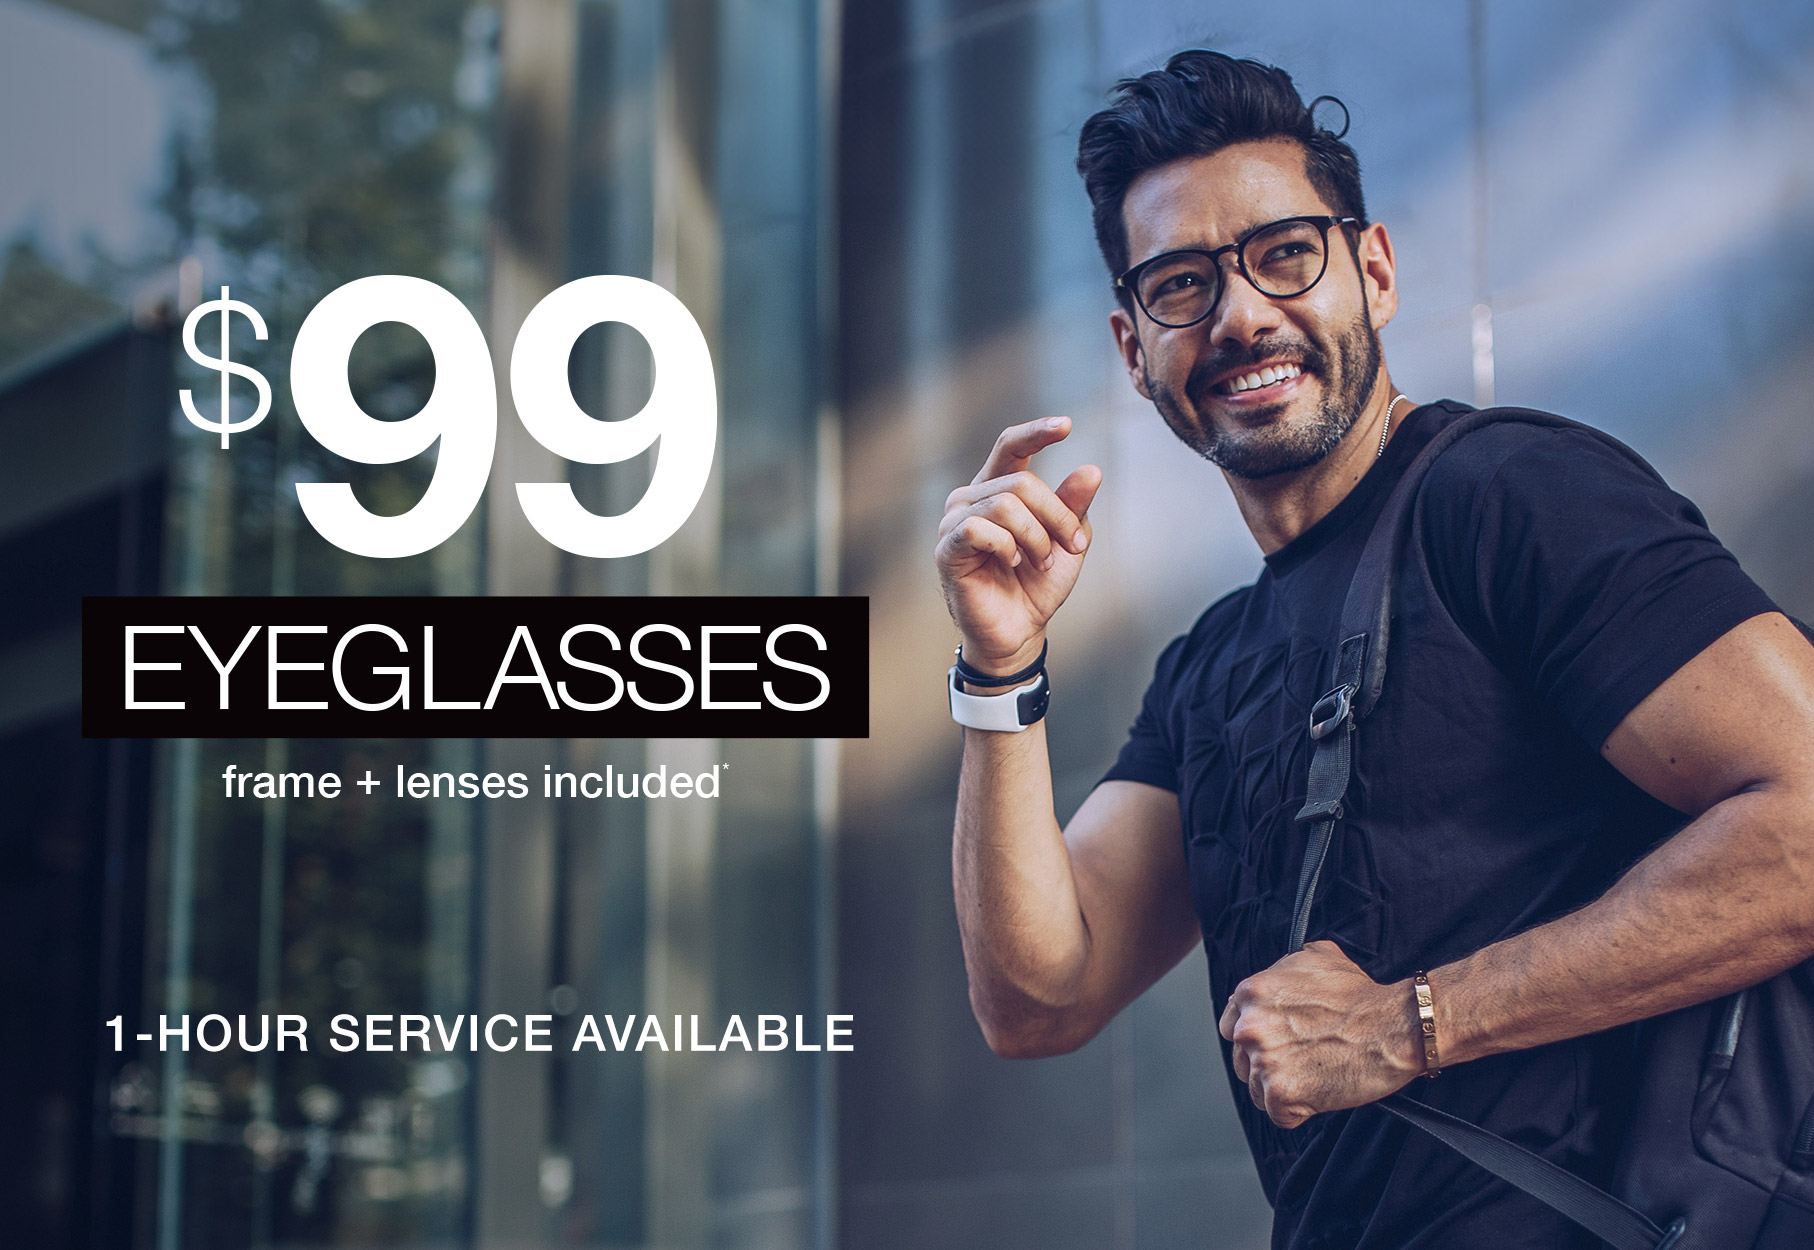 Text: $99 Eyeglasses frame + lenses included* 1-hour service available Photo: smiling man wearing eyglasses and a black t-shirt with a backpack over his shoulder